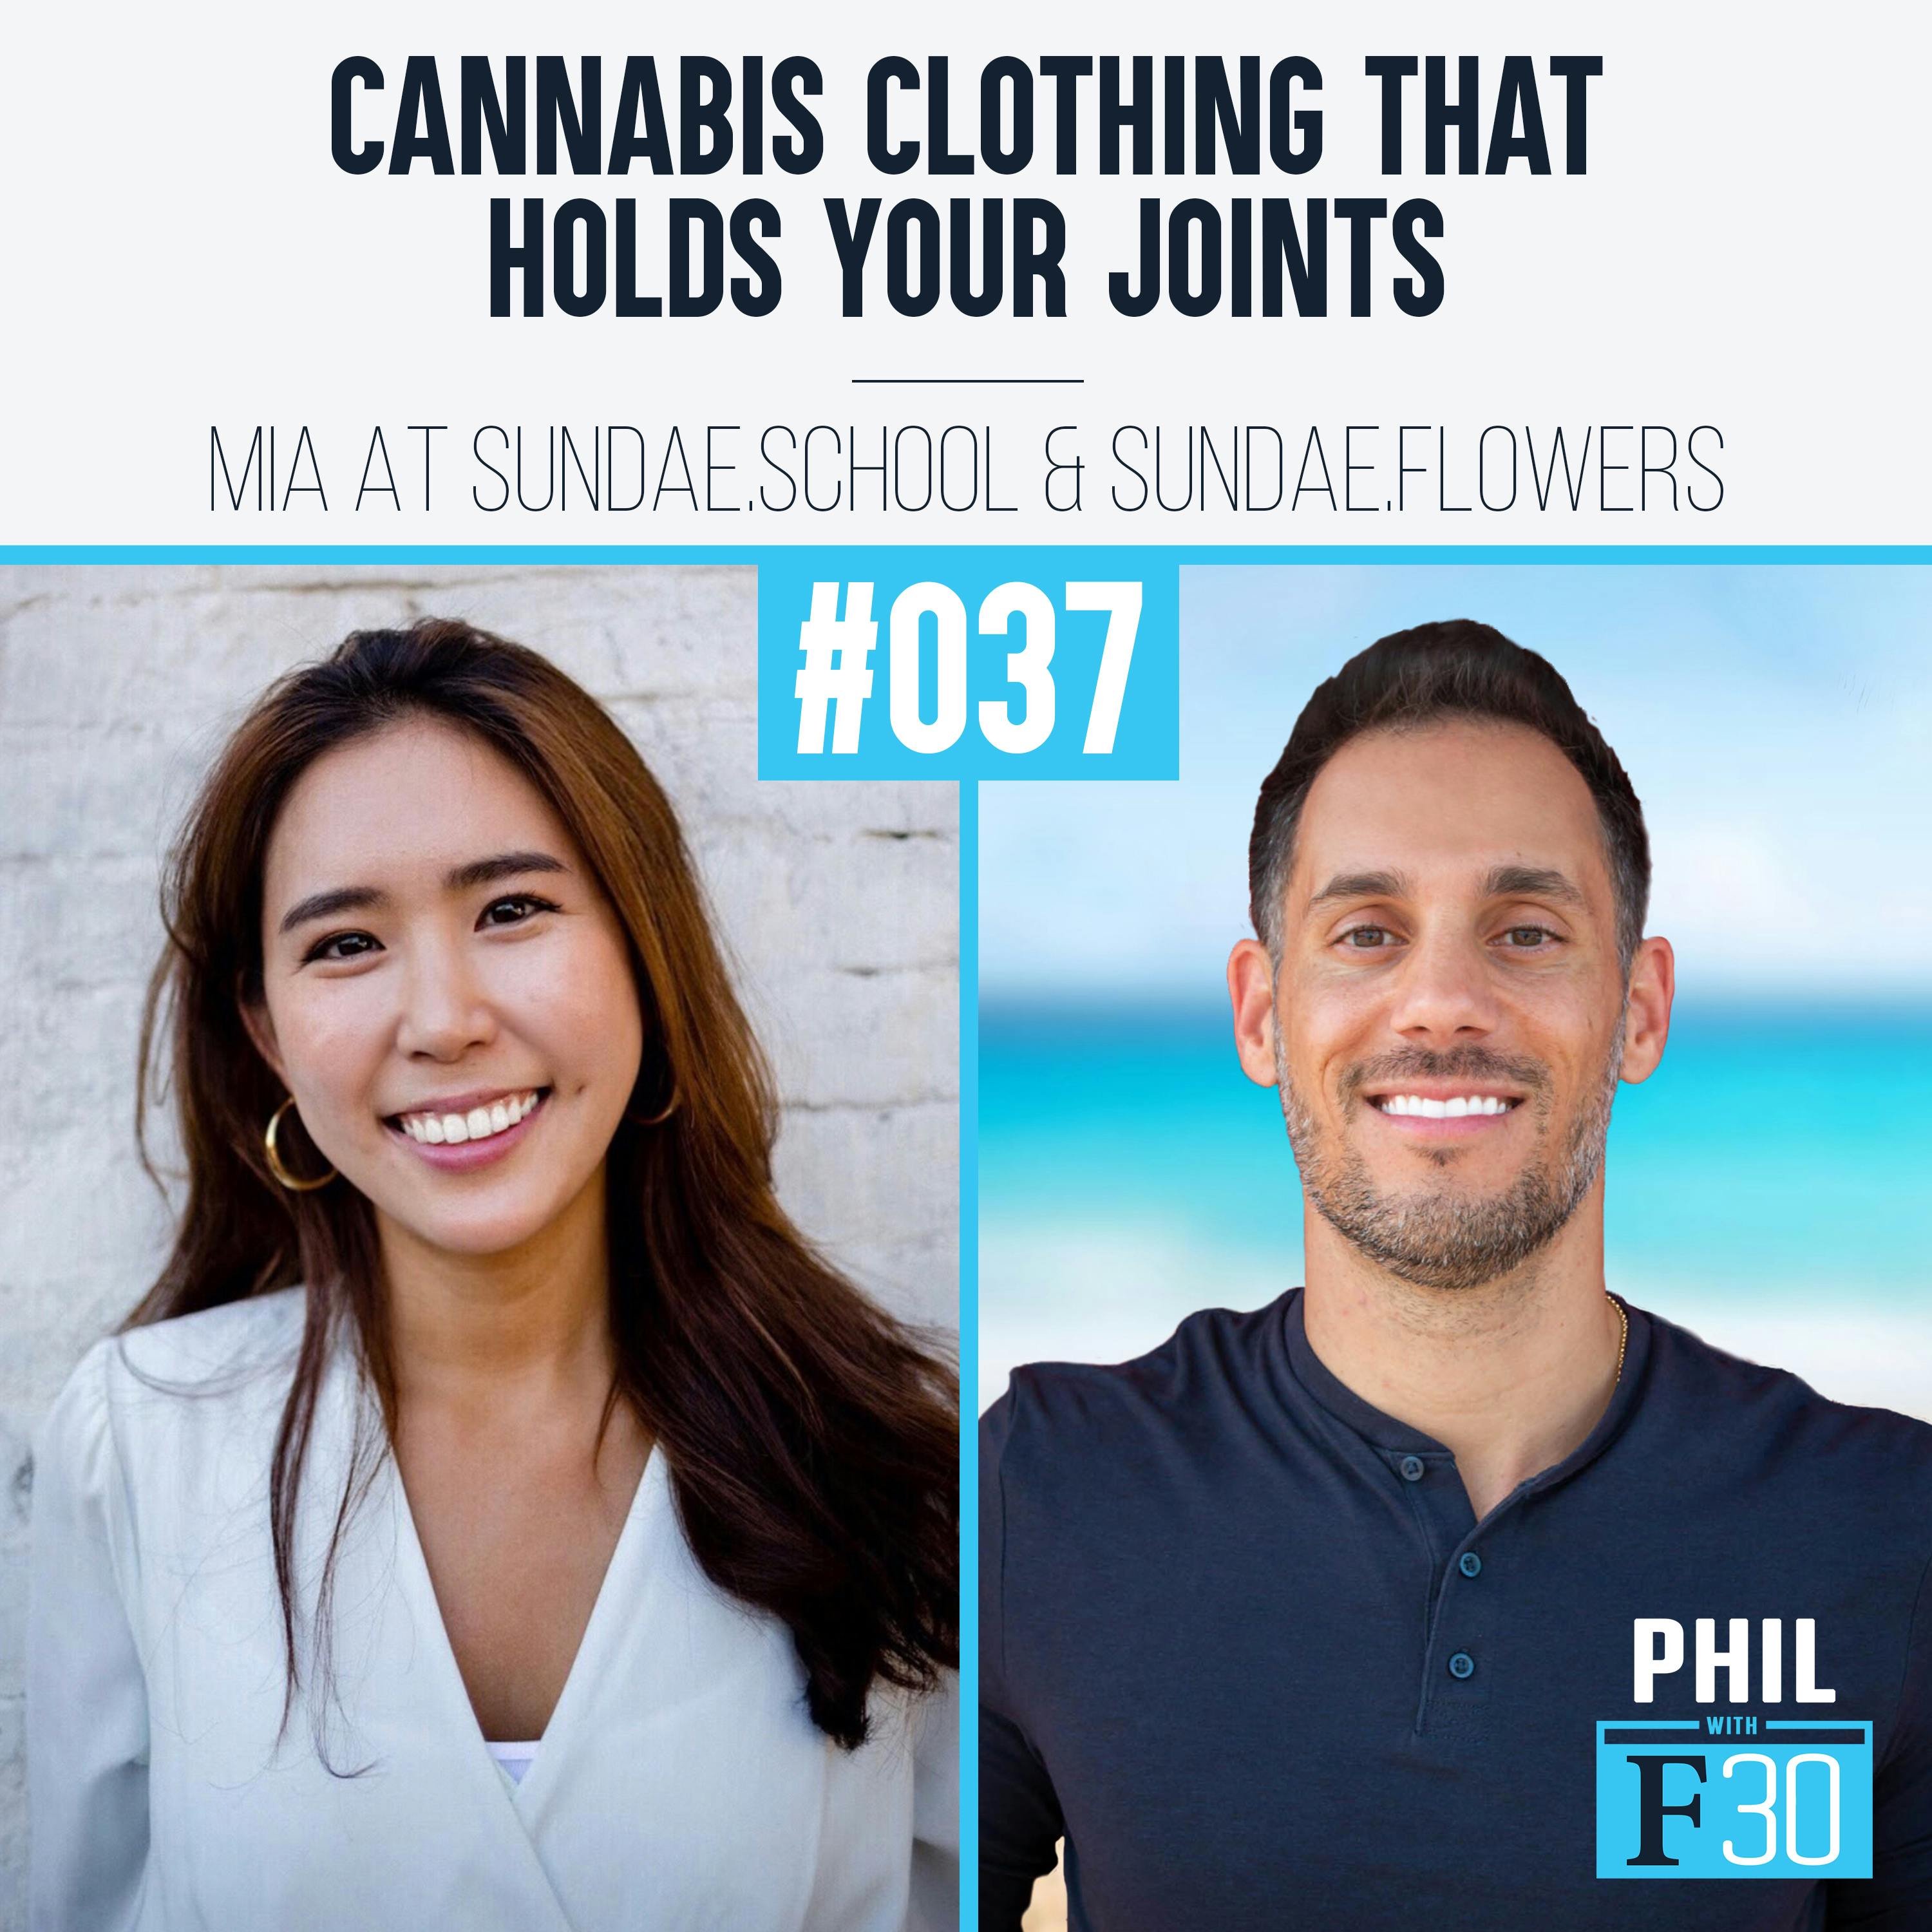 037 | ”Cannabis Clothing that Holds Your Joints” (Mia at Sundae.School & Sundae.Flowers)